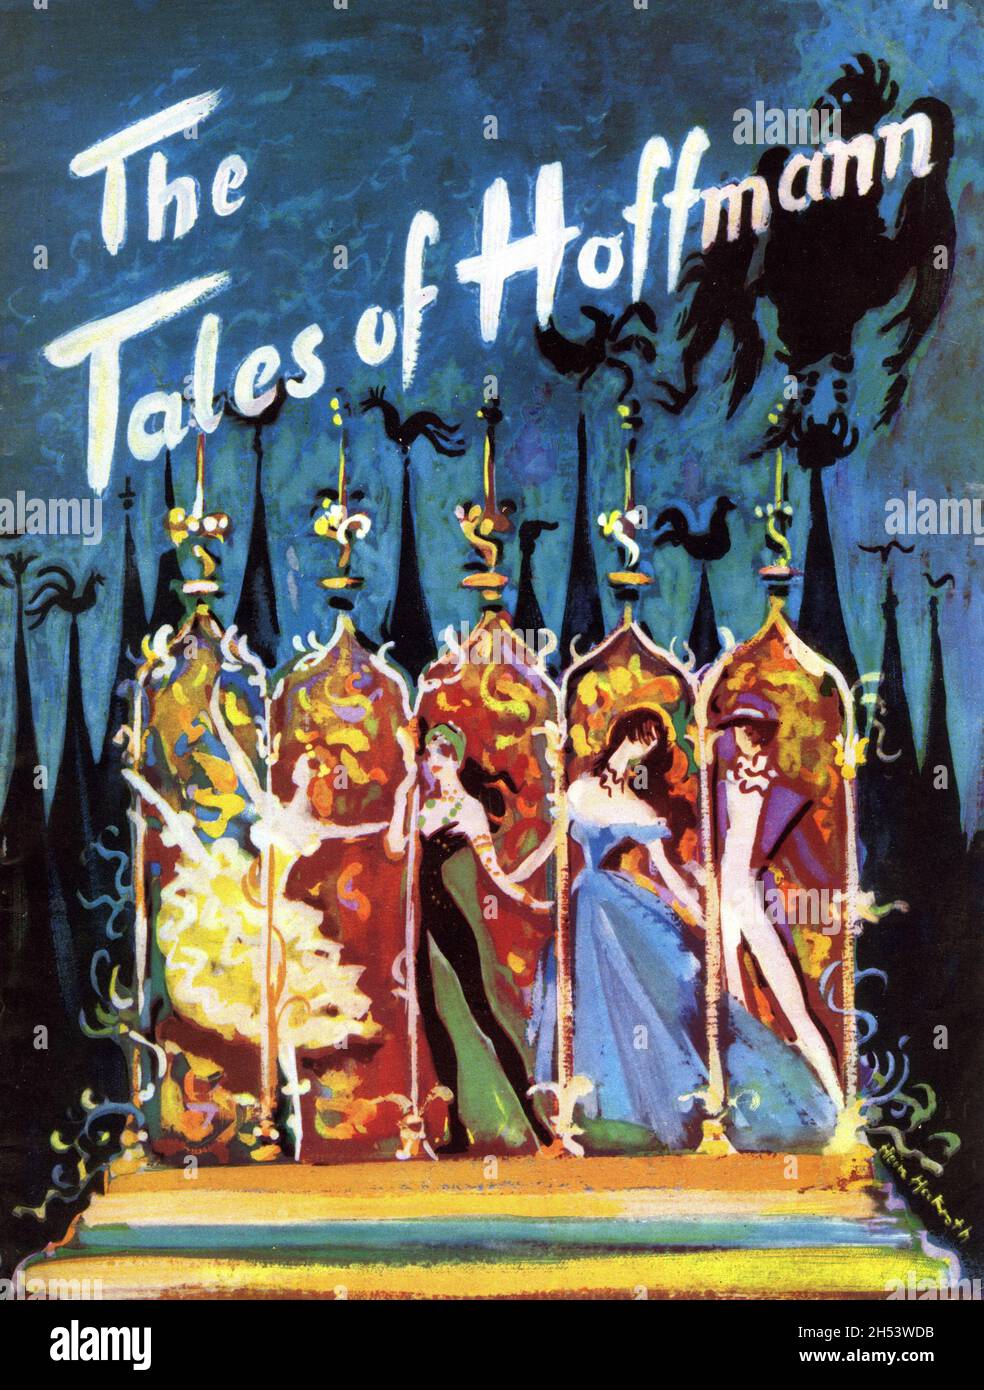 Front Cover of British Brochure with Artwork by HEIN HECKROTH for THE TALES OF HOFFMANN 1951 directed written and produced by MICHAEL POWELL and EMERIC PRESSBURGER music by Jacques Offenbach English libretto Dennis Arundell conductor Sir Thomas Beecham production design Hein Heckroth costume design Ivy Baker and Hein Heckroth choreographer Frederick Ashton The Archers / Vega Film Productions / British Lion Film Corporation Stock Photo